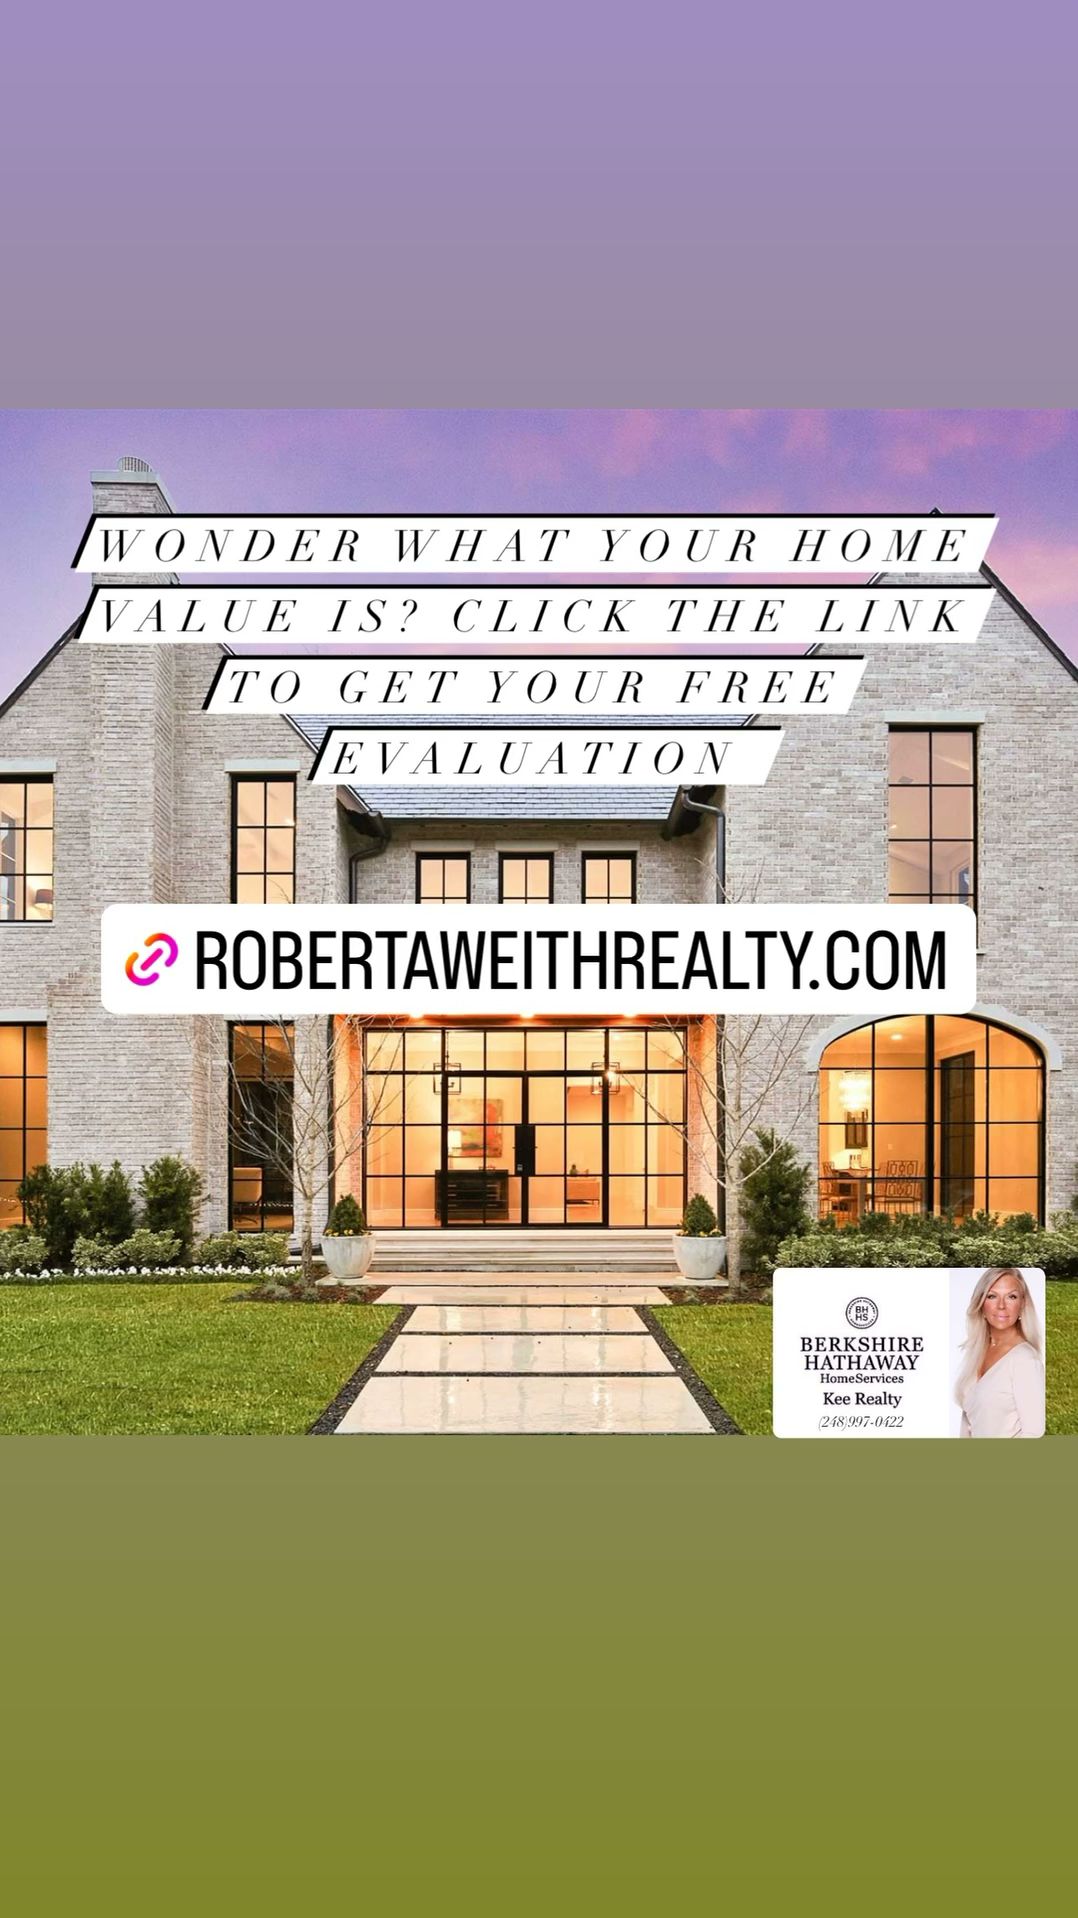 Berkshire Hathaway HomeServices Kee Realty Rochester